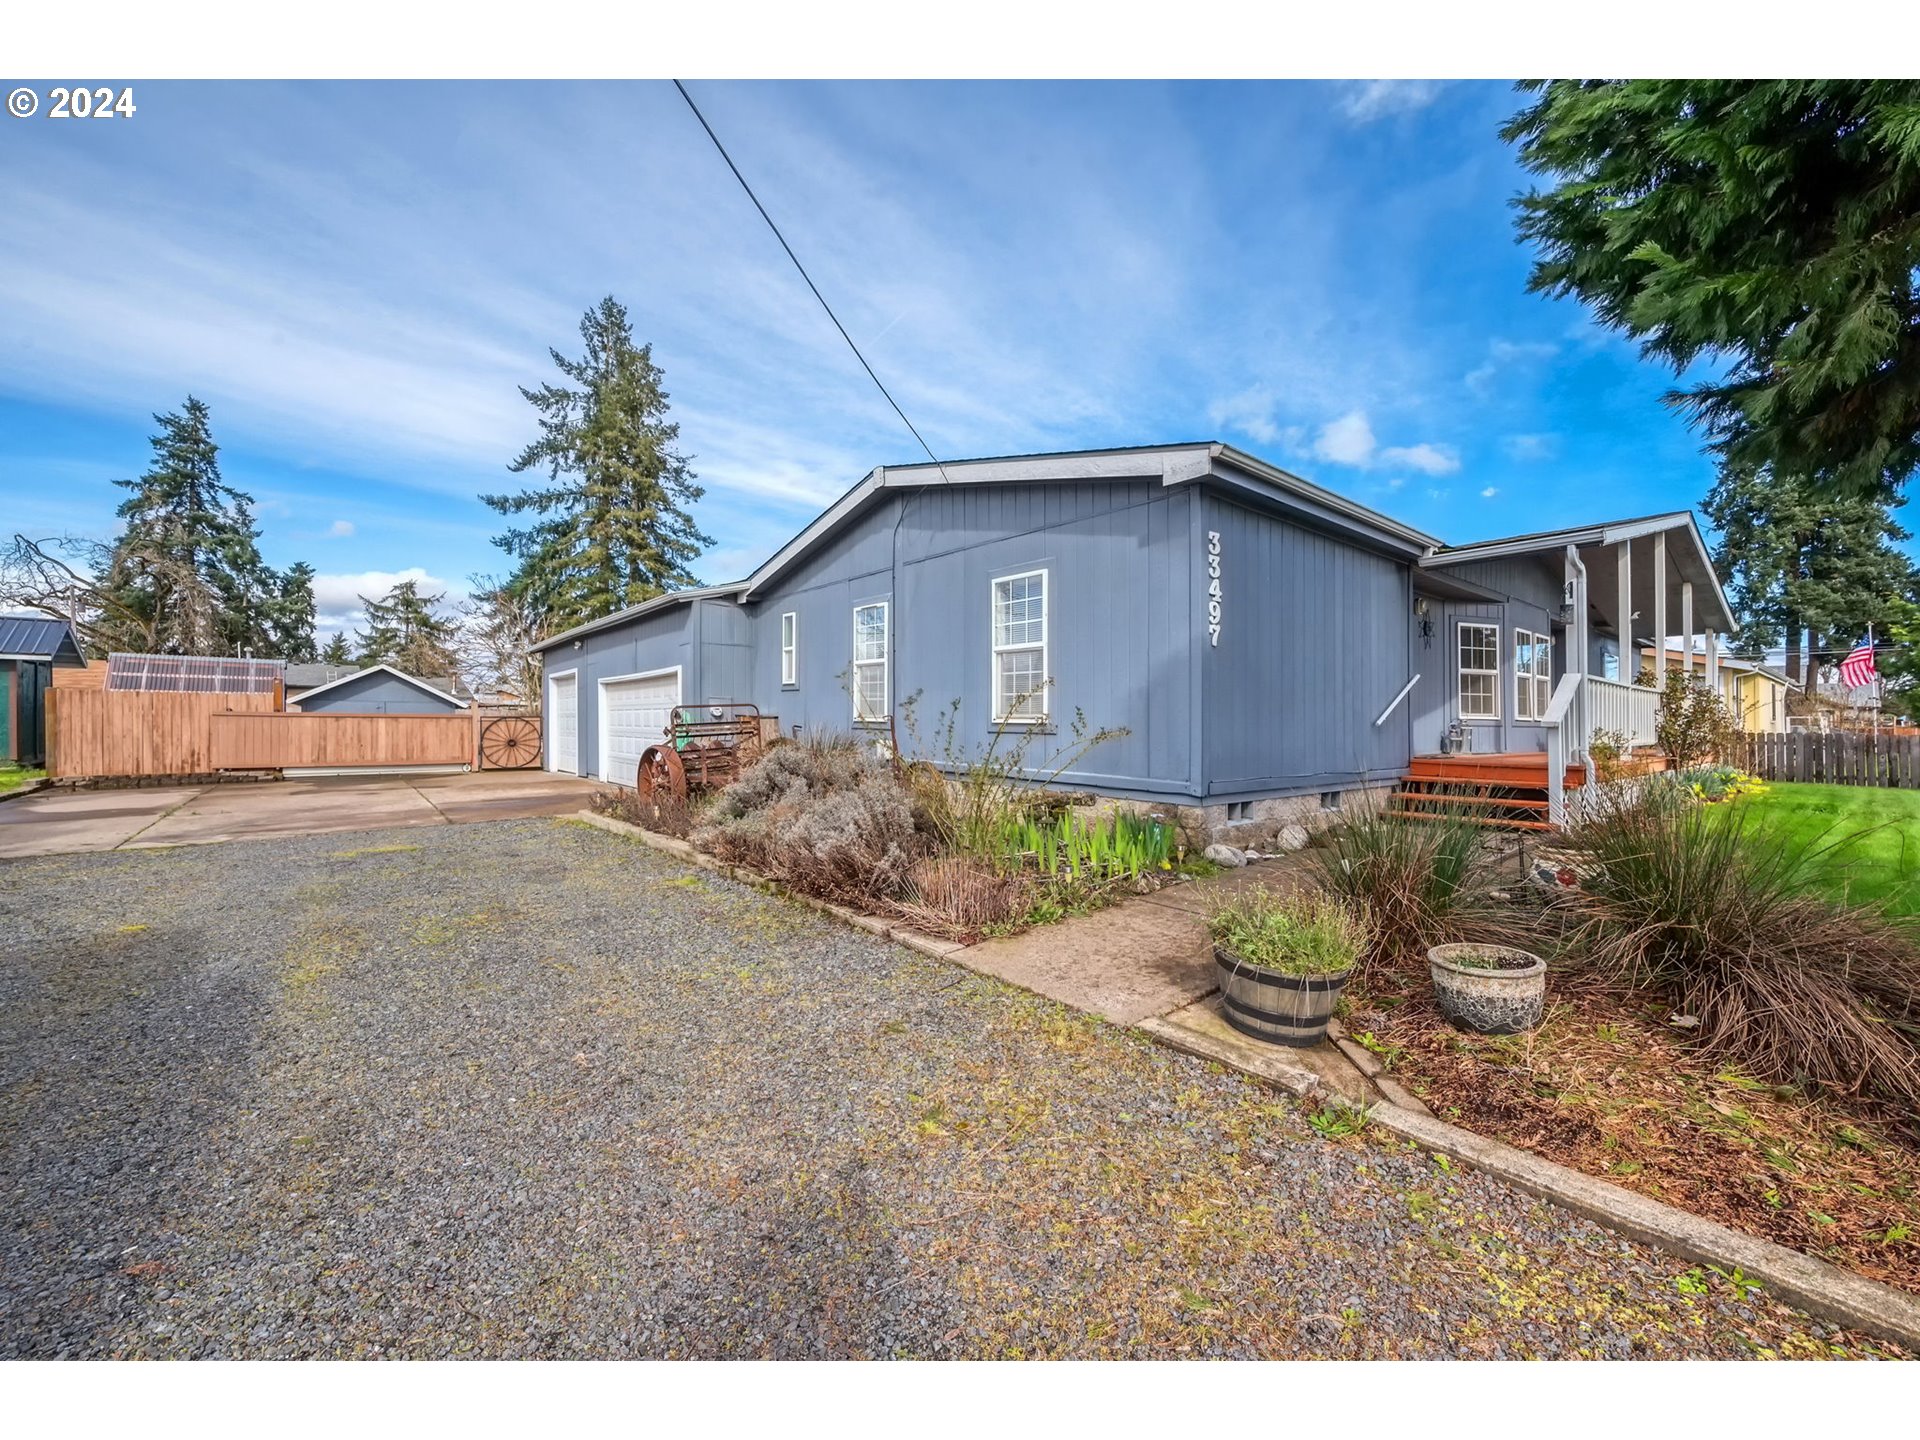 33497 SCOTT AVE, Creswell, OR 